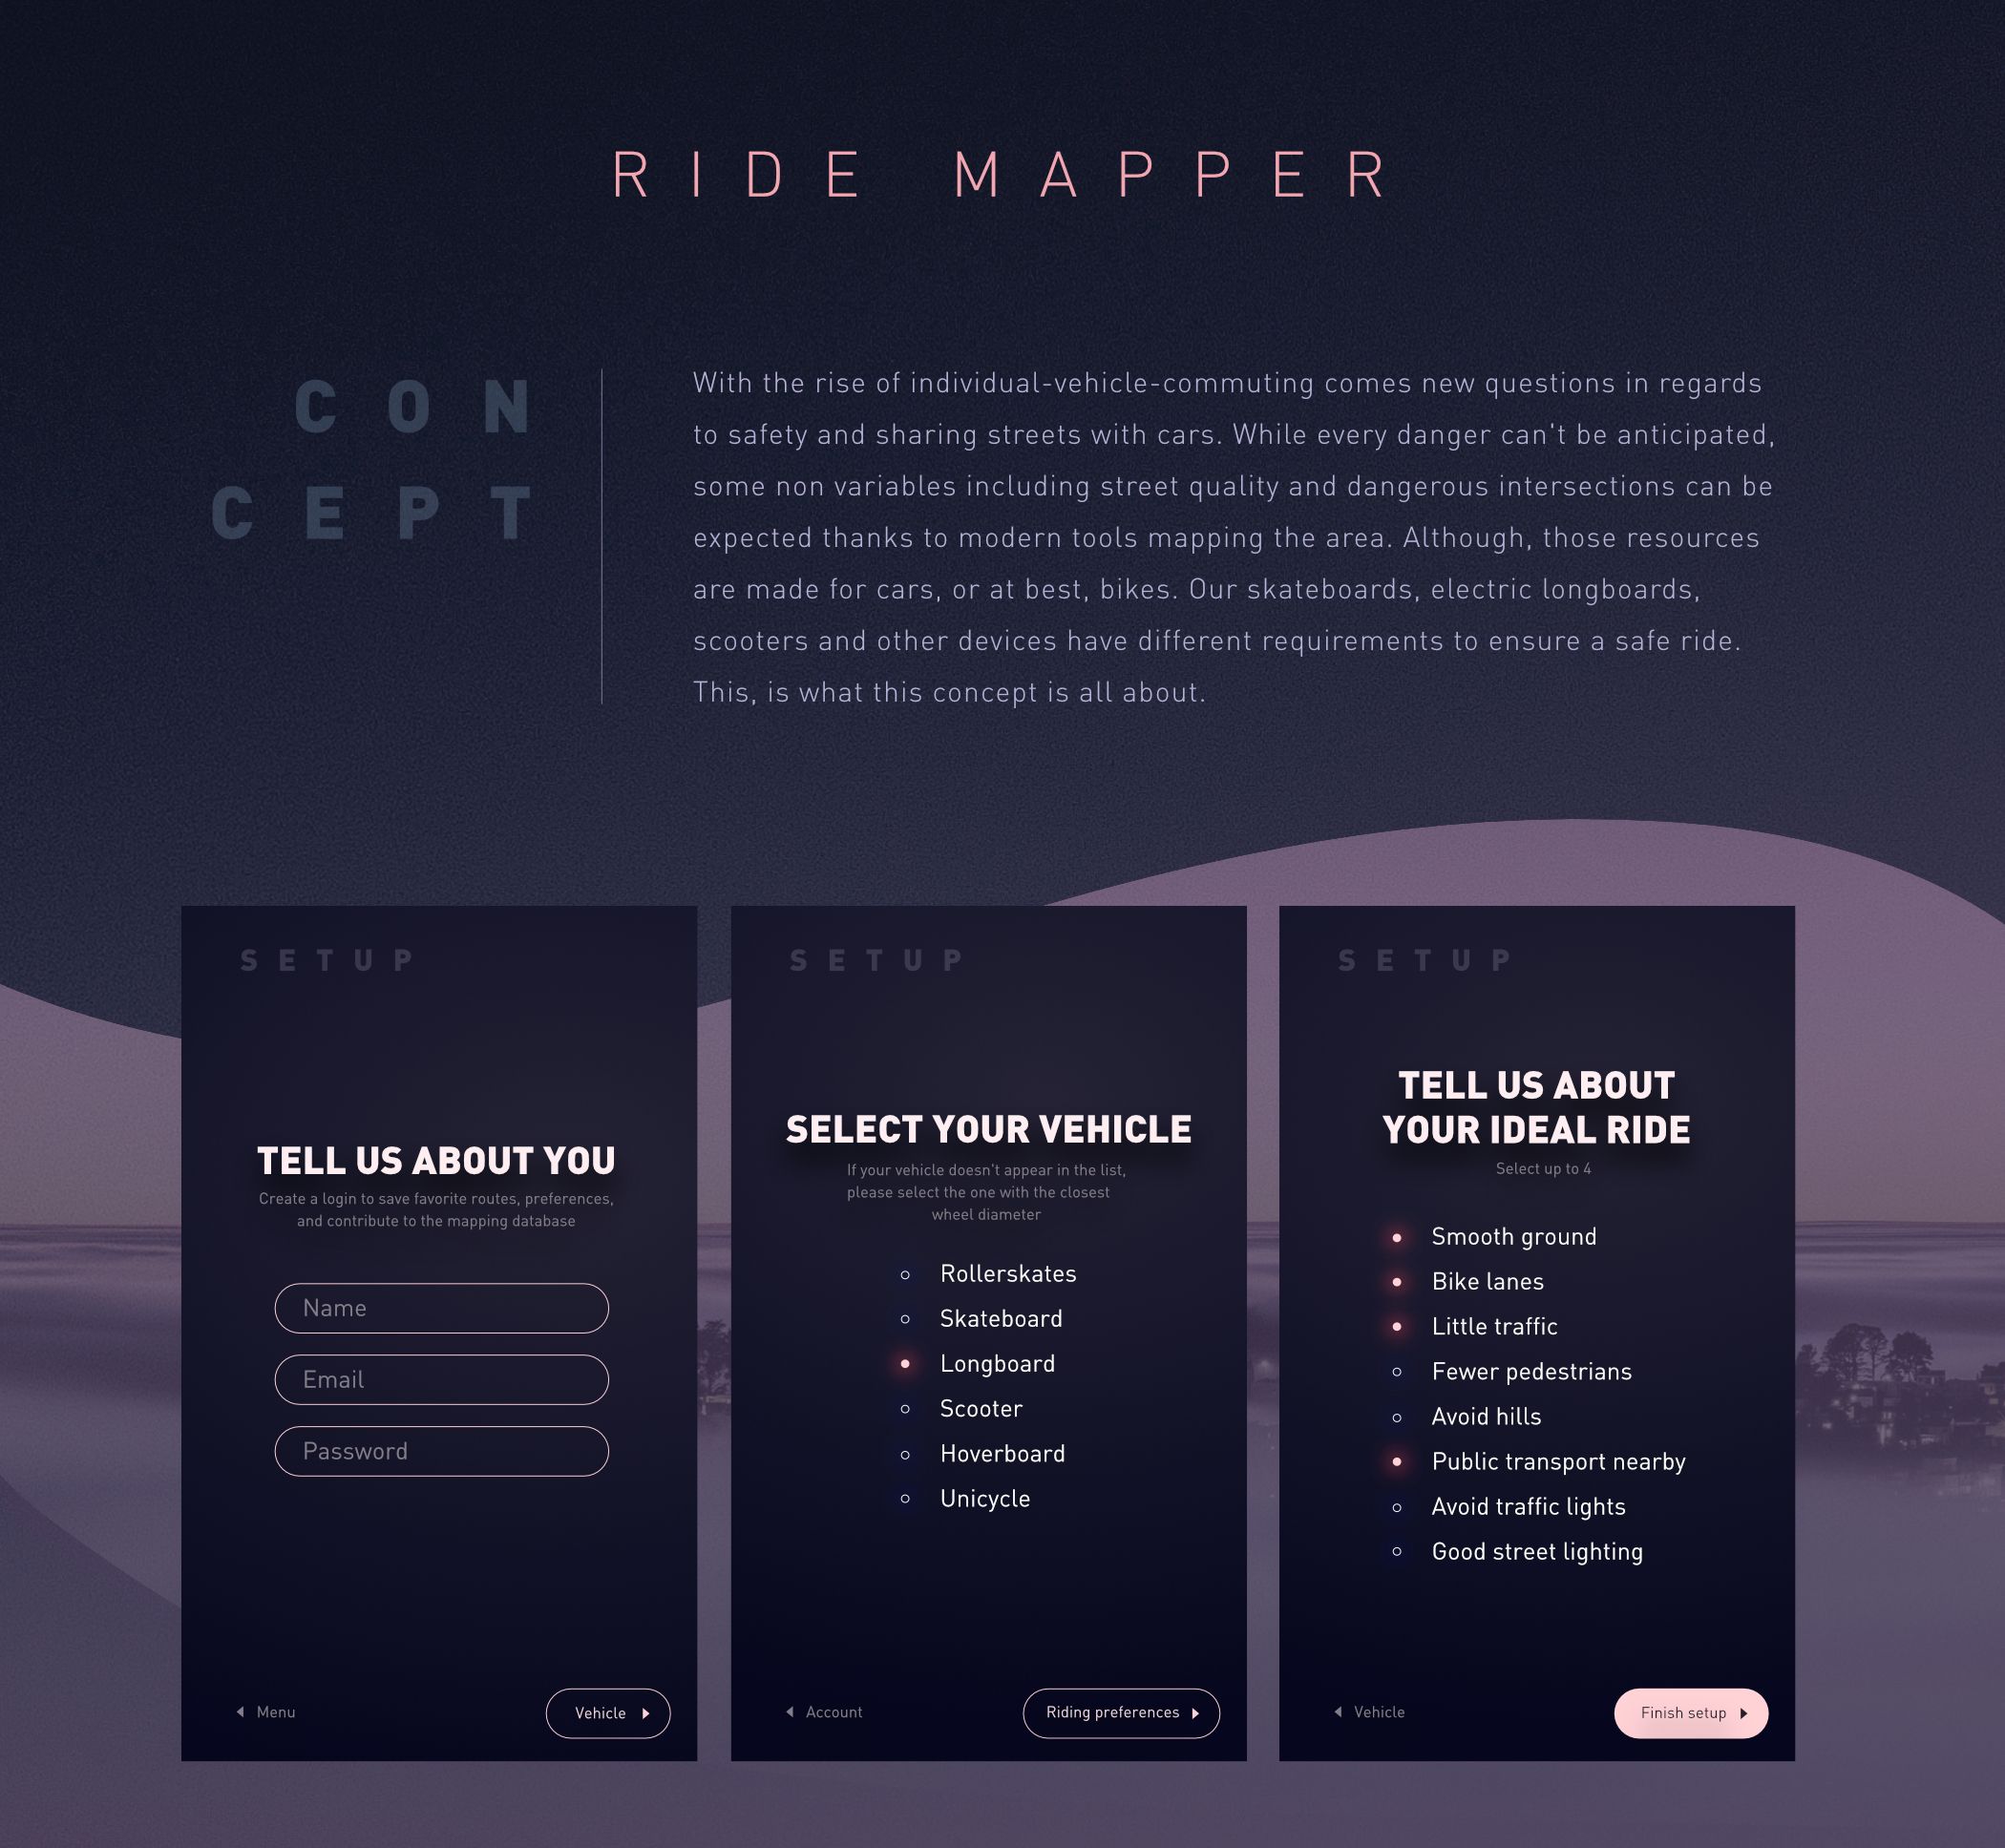 Ride Mapper is a concept app enabling users to get a custom route adapted to their vehicle requirements and preferences. This is a collaborative concept by Meg Wehrlen, facilitating the use of electric skateboards, scooters, on wheels, rollerblades and other tools, accessories or devices